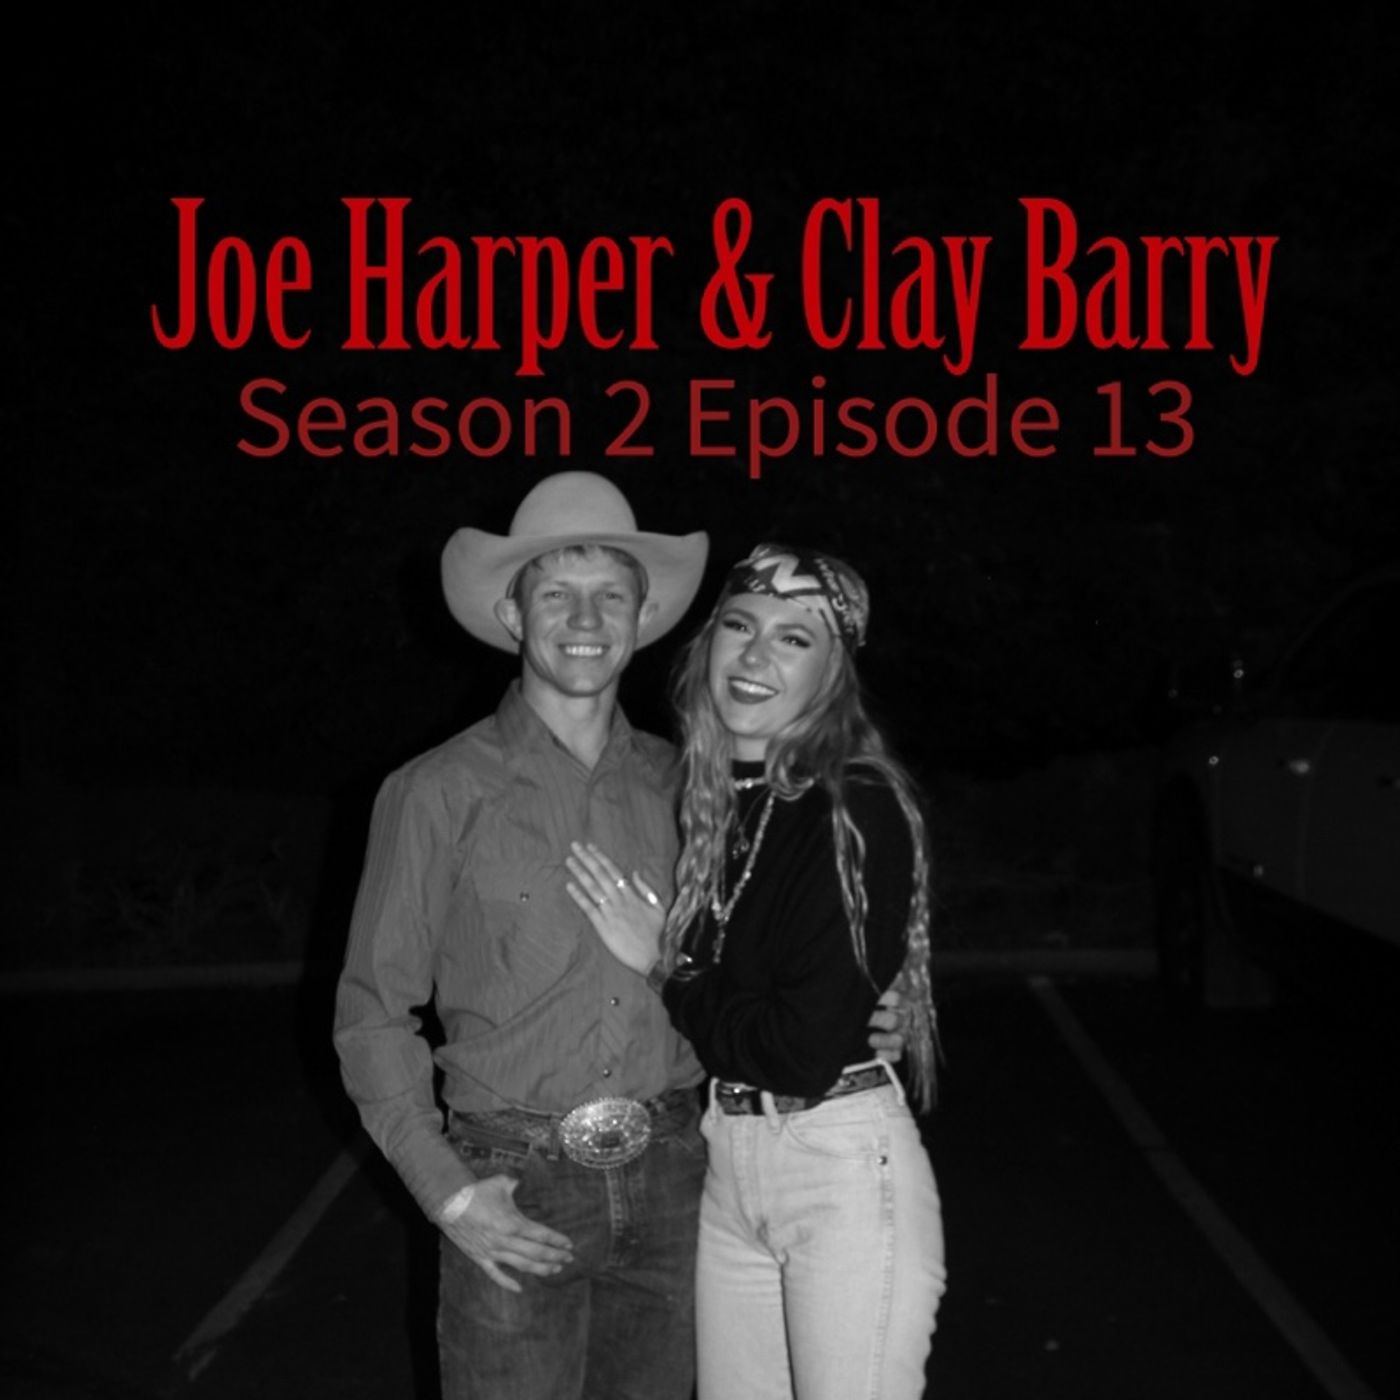 Season 2 Episode 13 - The Tables are Turned with Joe Harper